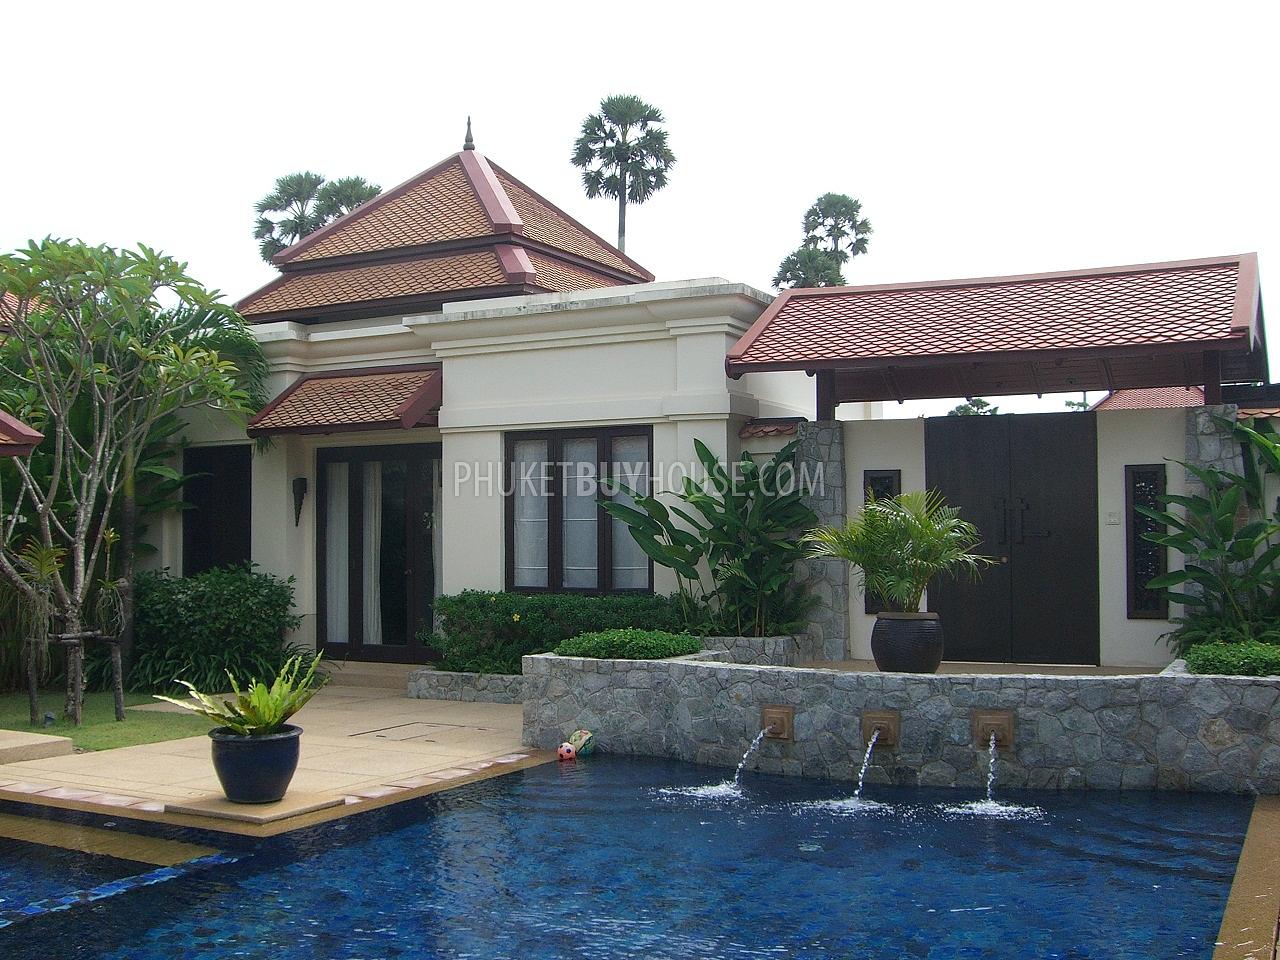 BAN1211: Villa with overlooks the Pool and exquisite Thai garden. Фото #4